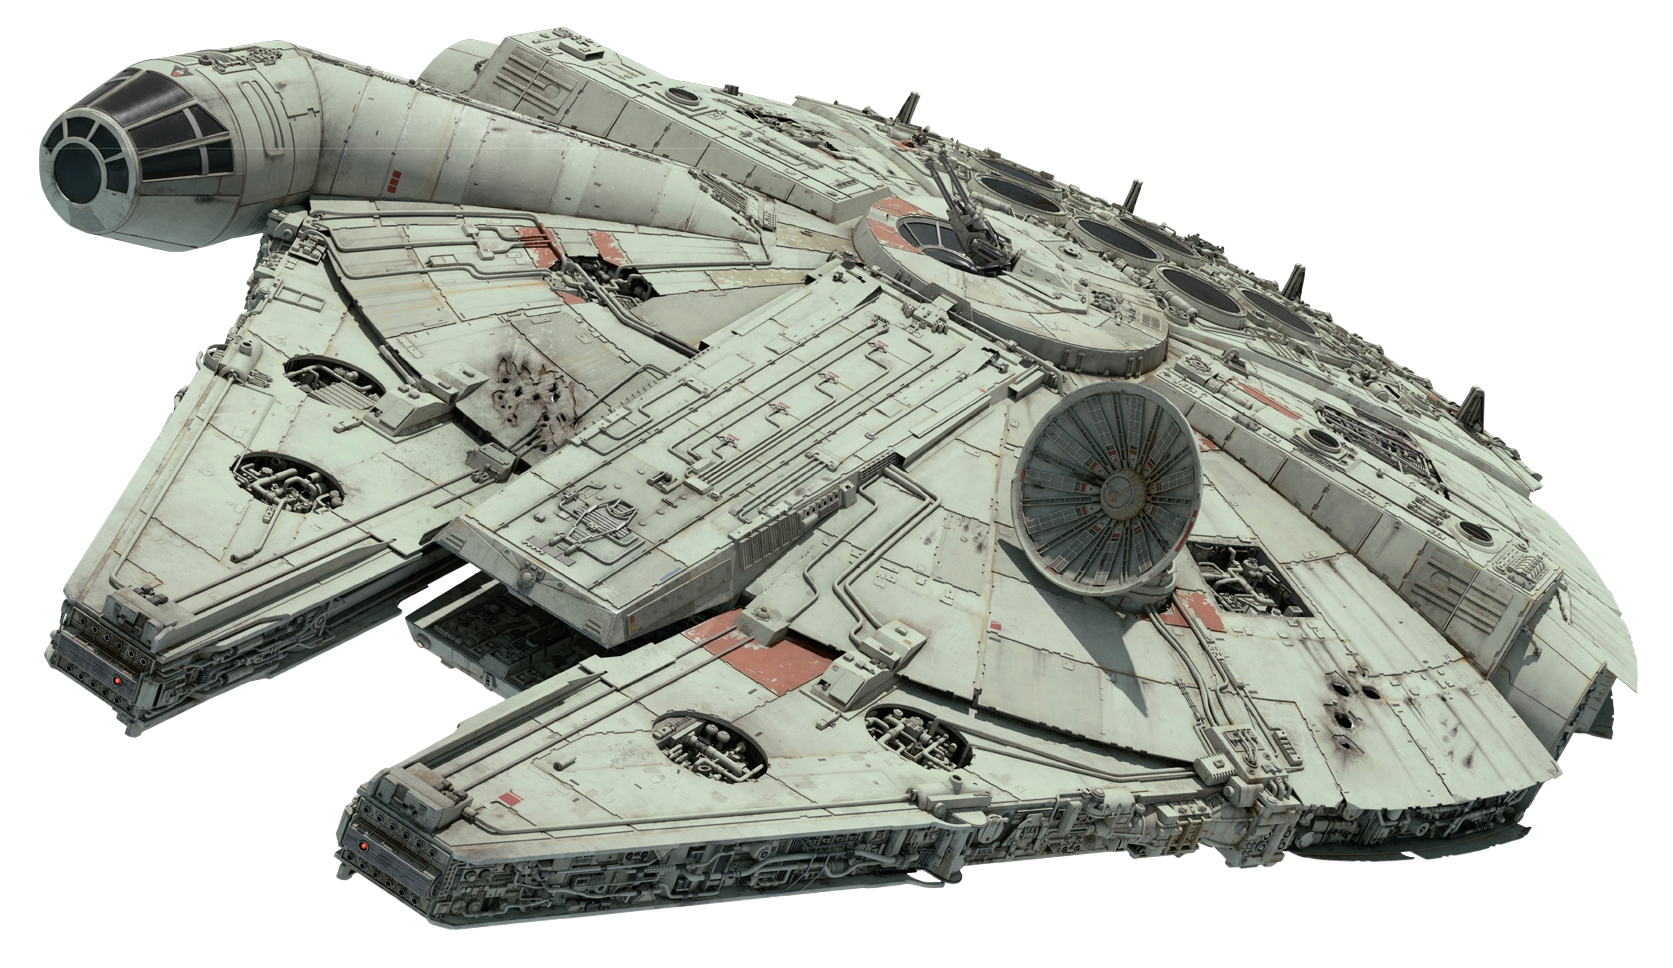 What is the Millennium Falcon?